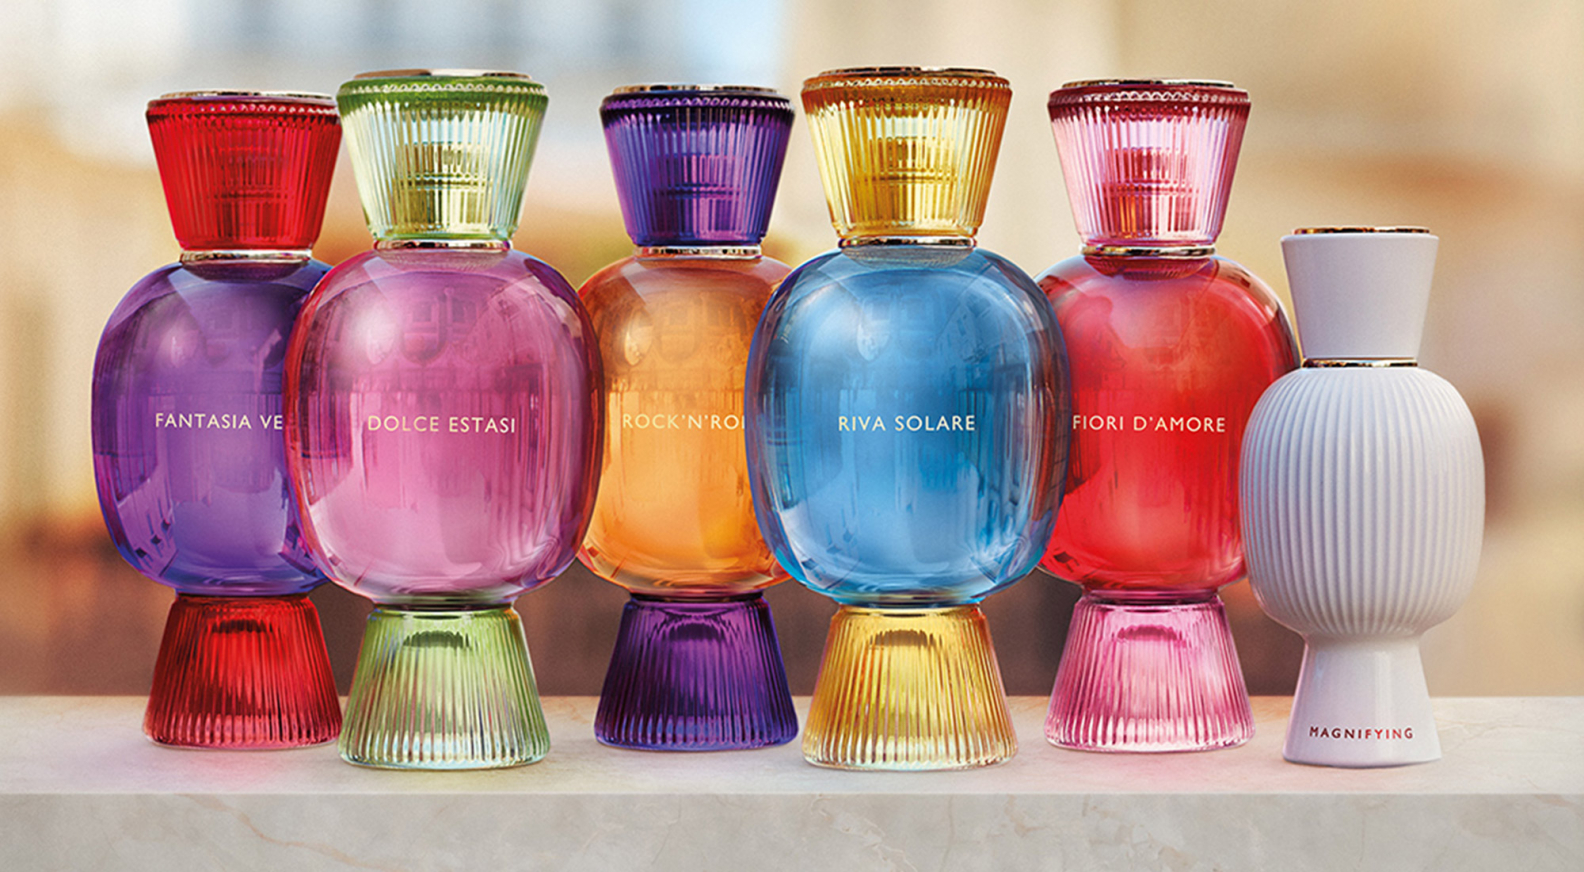 Bvlgari Allegra, the new personalized fragrance experience from